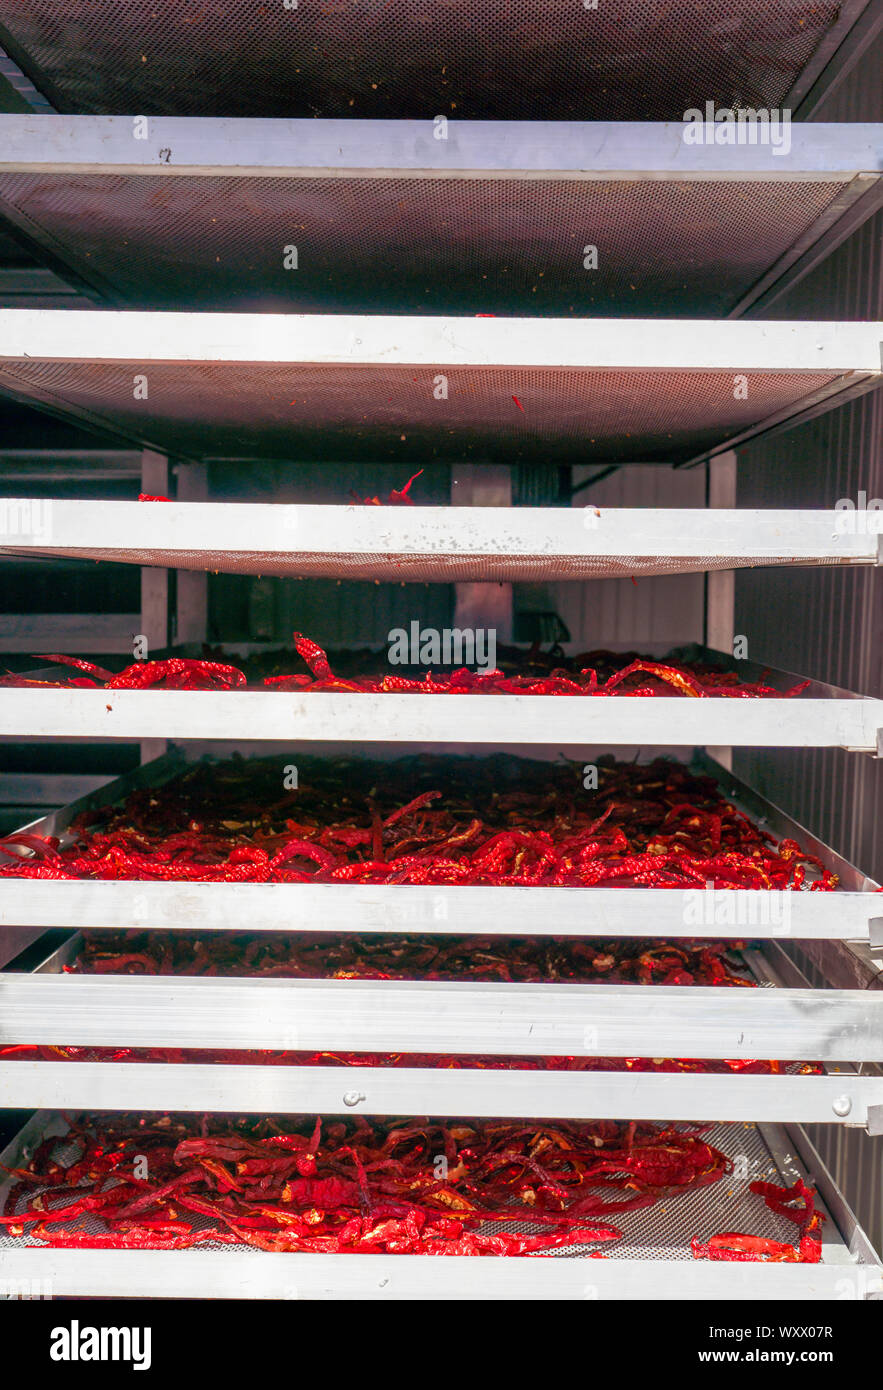 https://c8.alamy.com/comp/WXX07R/industrial-food-dehydrator-machine-professional-fruits-and-vegetables-dehydration-machines-long-red-pepper-in-it-peppers-can-be-dried-in-the-oven-a-WXX07R.jpg